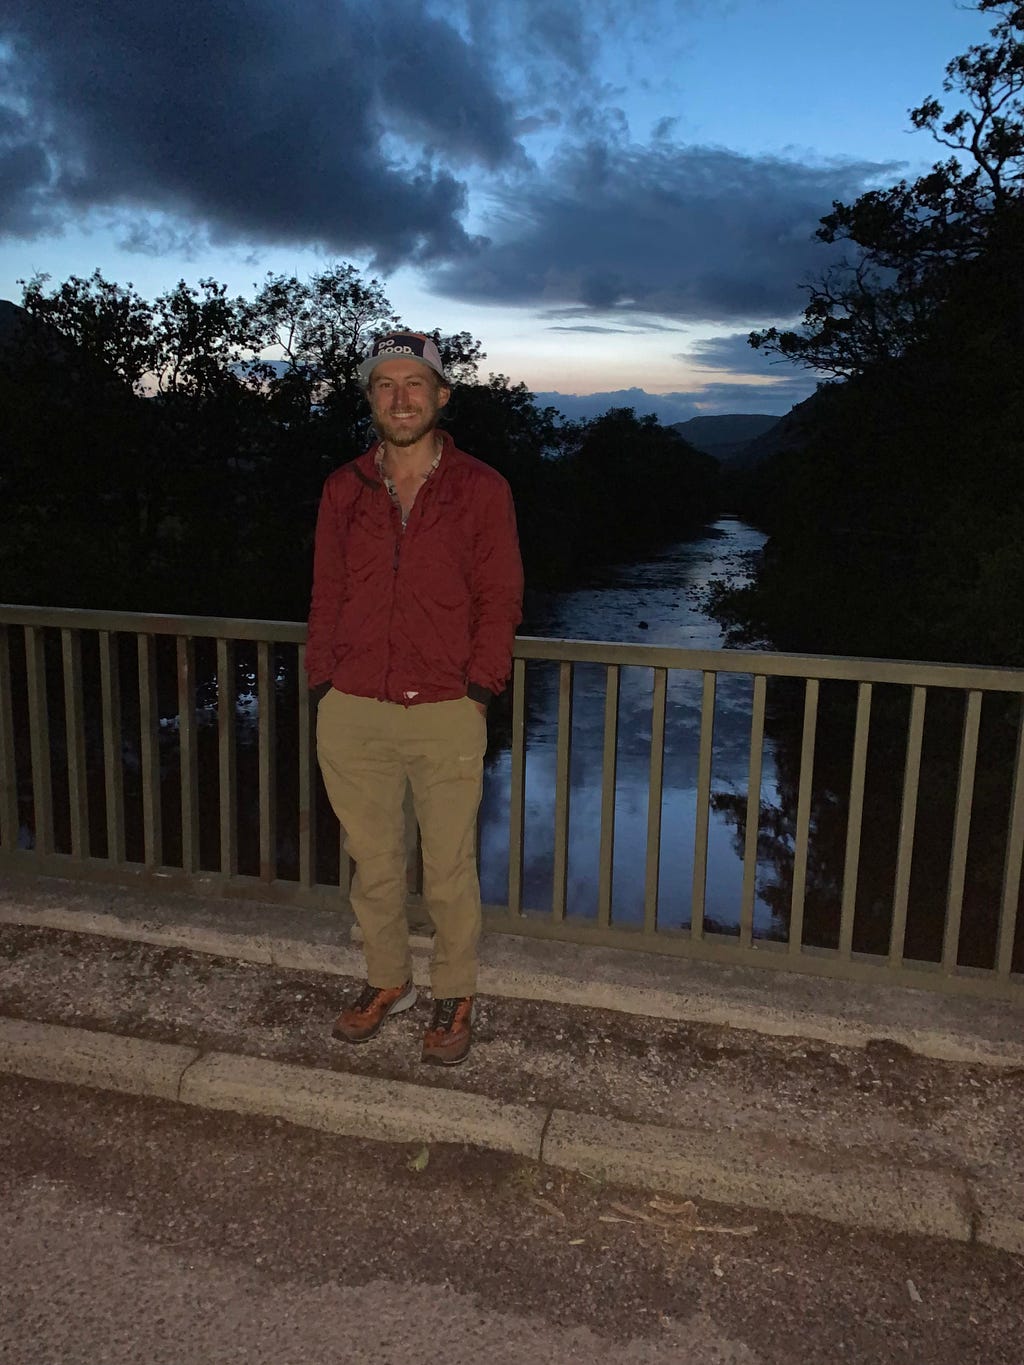 The author standing on a bridge at dusk.